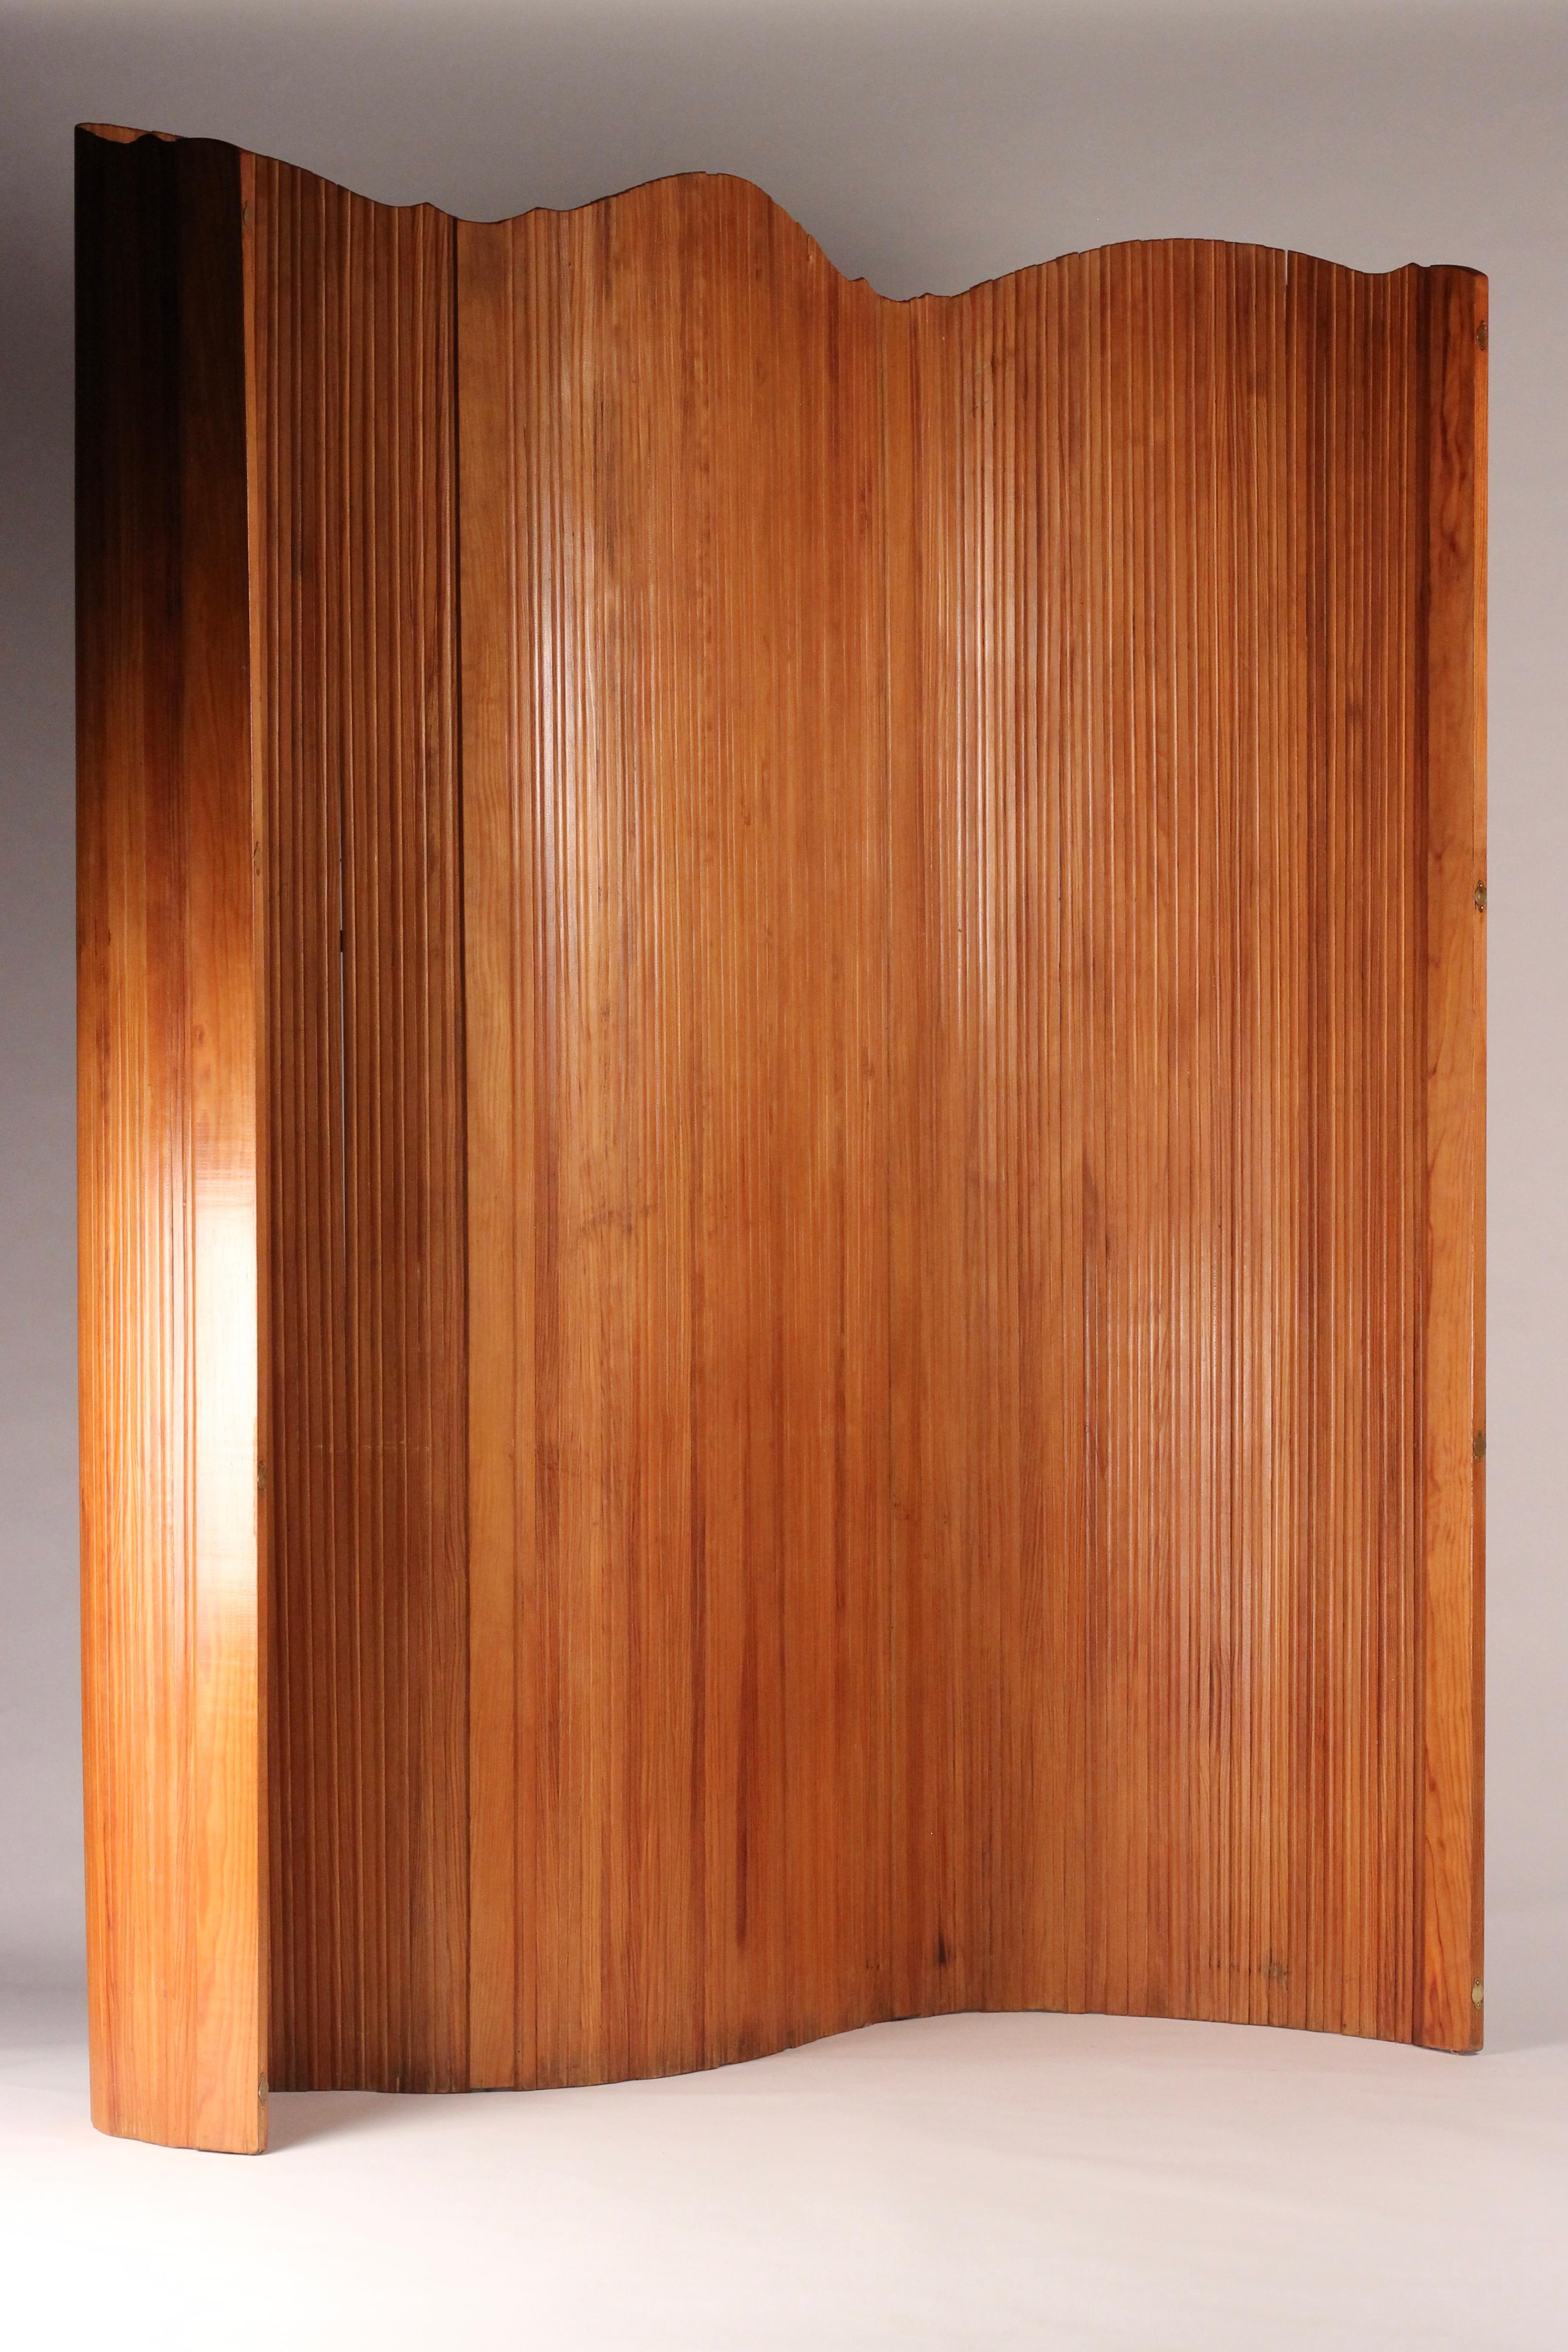 Mid-20th Century French Art Deco tambour screen room divider in Pine 1930’s attributed Baumman